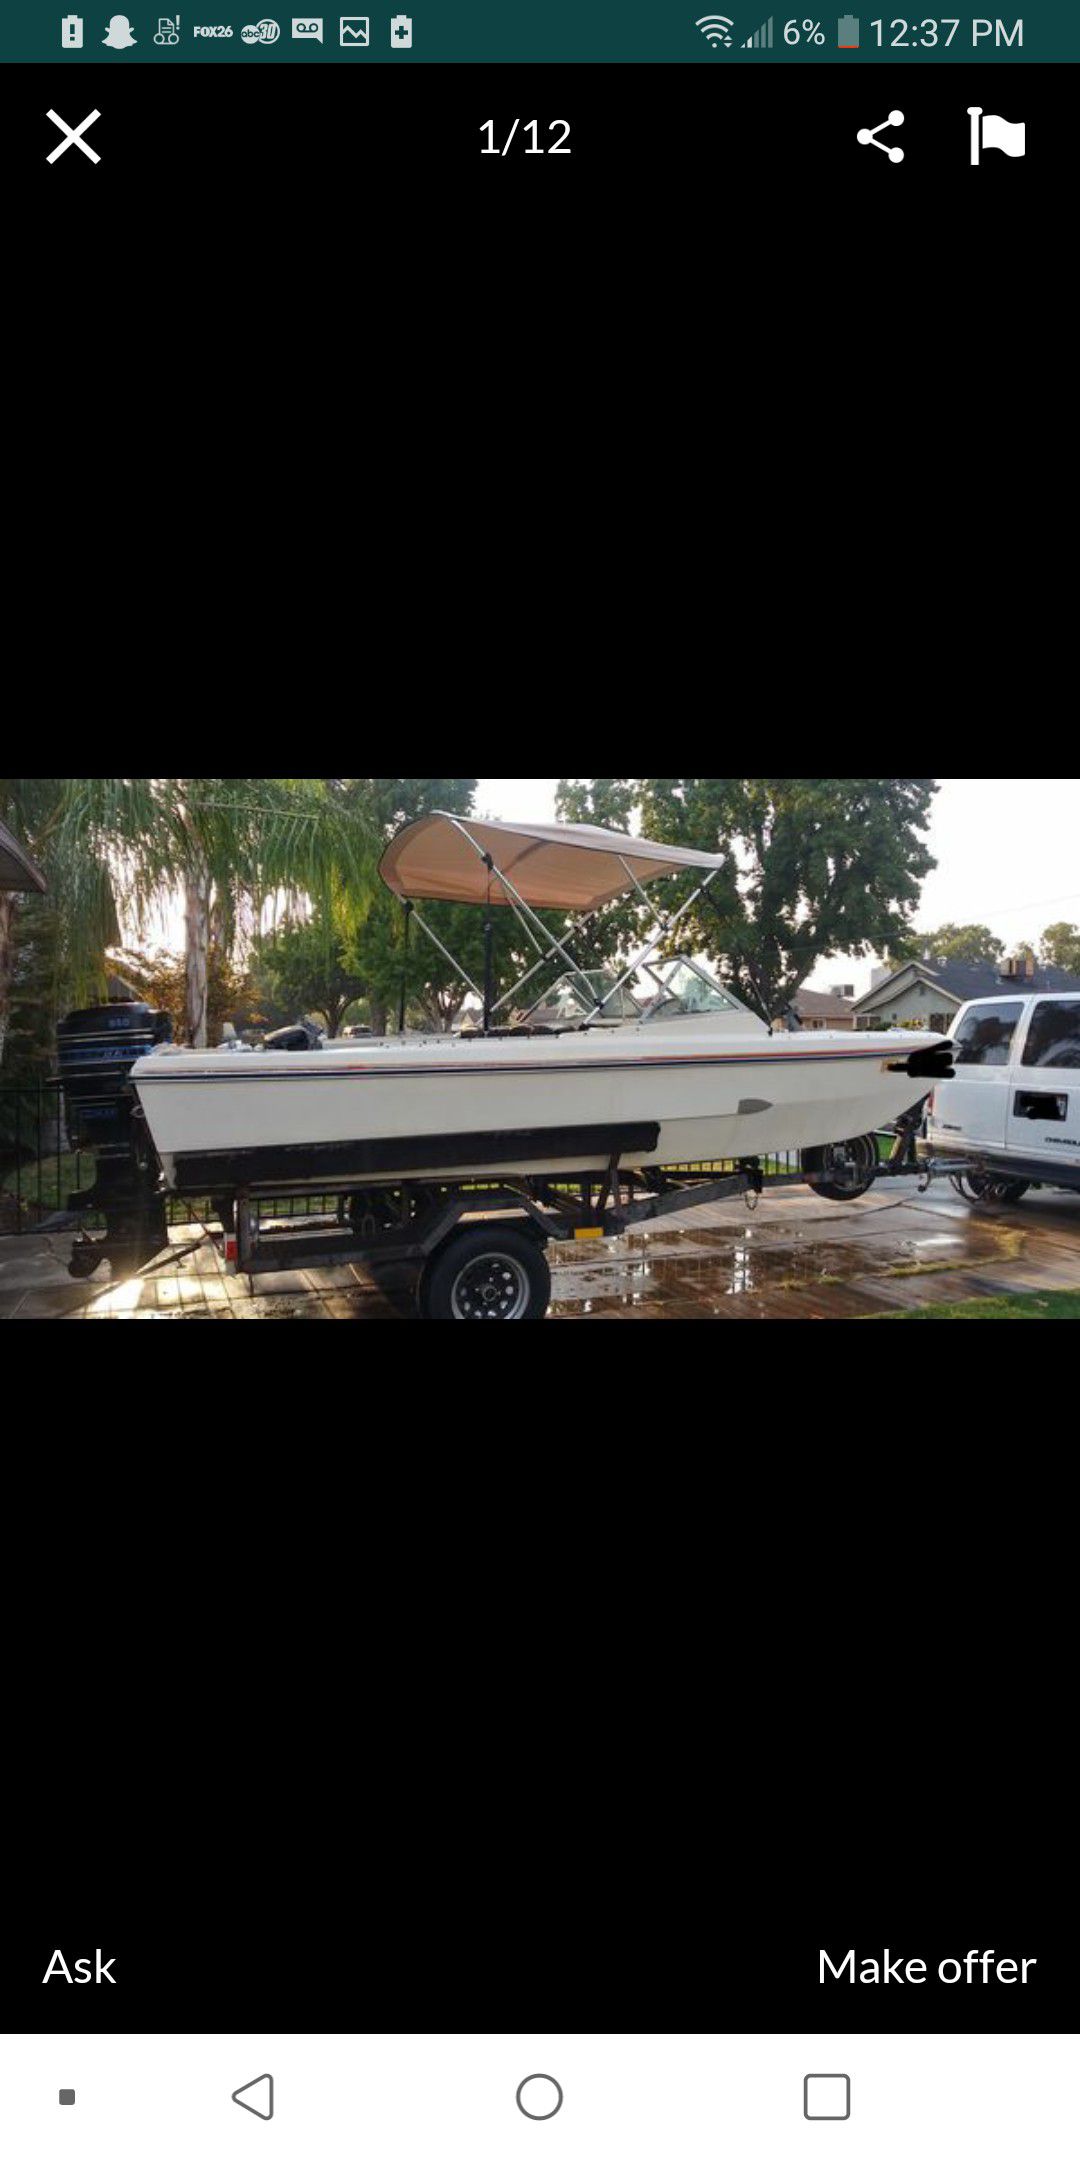 Nice boat ready for a new owner😊